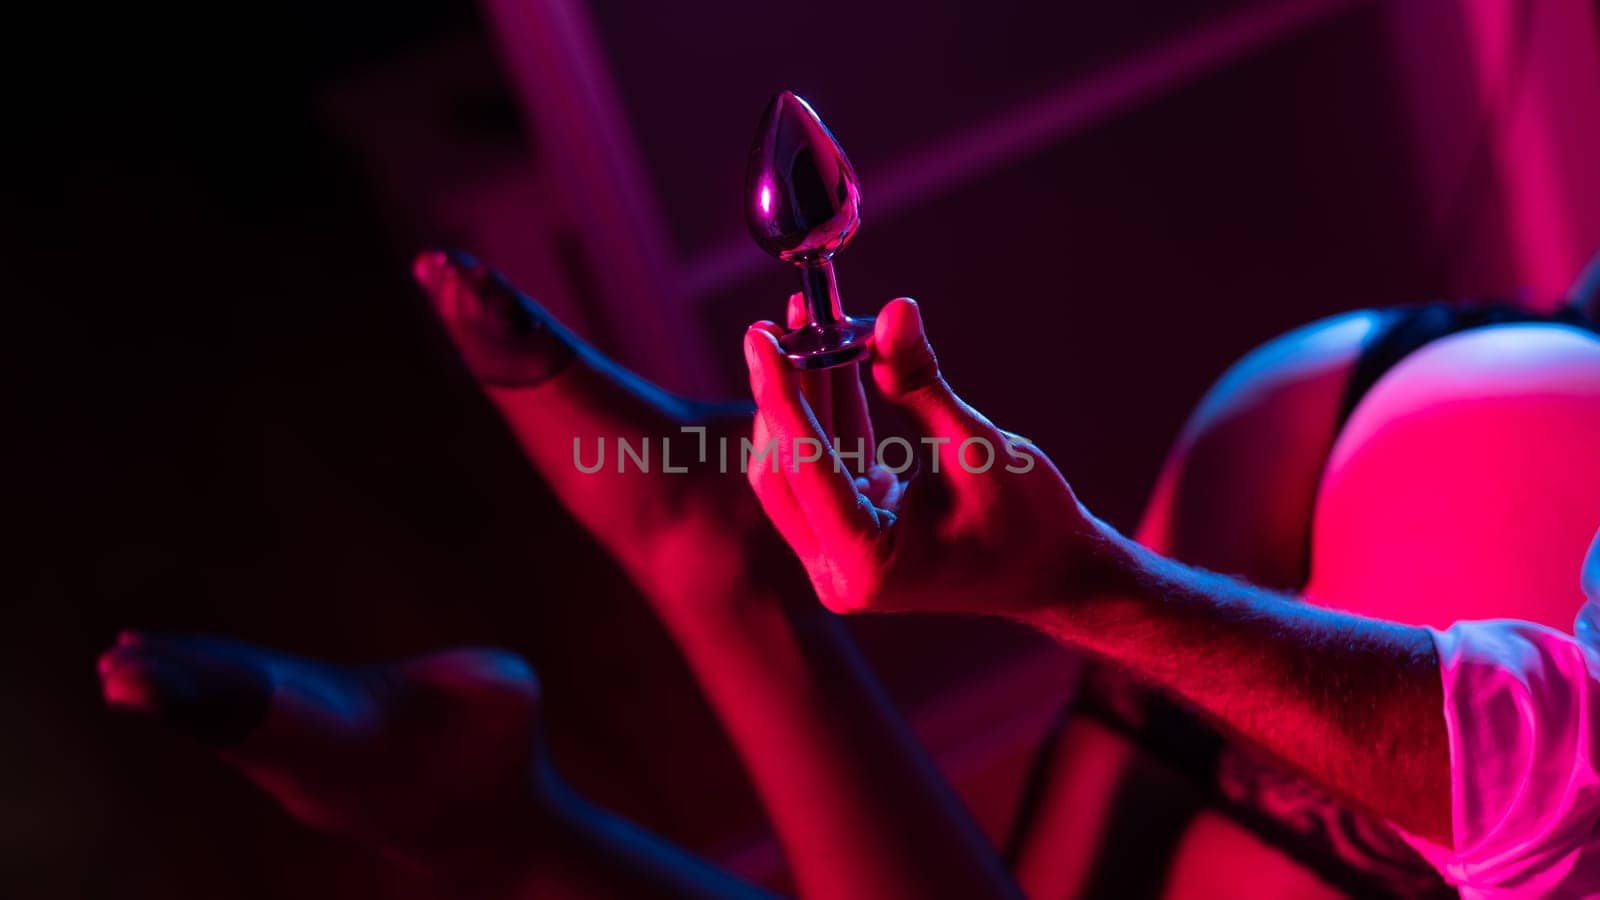 Man holding an anal plug. Close-up of female buttocks in underwear. Sexual preferences of the couple